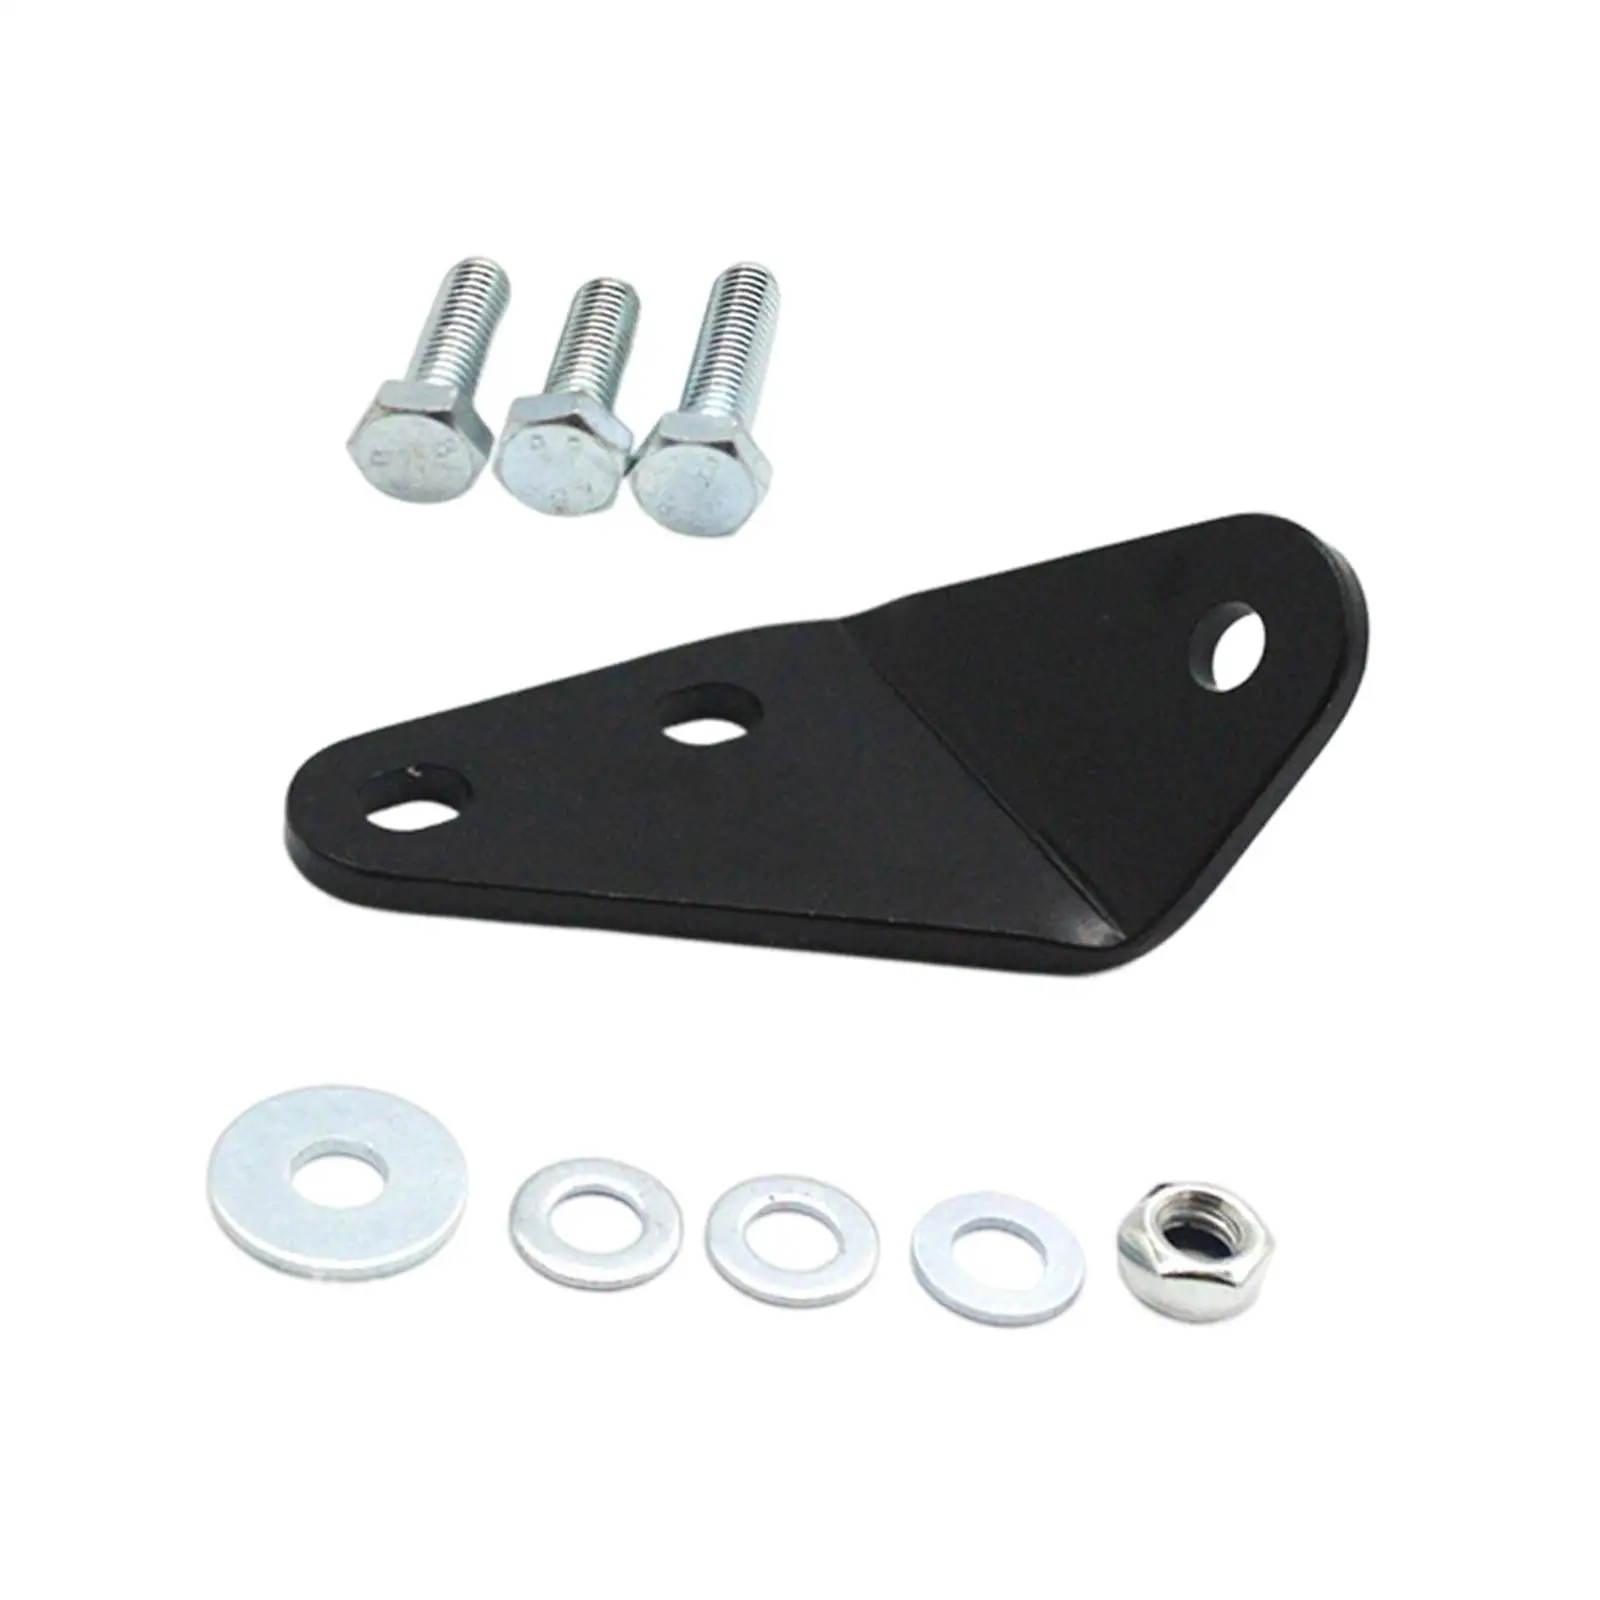 Clutch Pedal Repair Bracket Kit Easy Installation Replace Durable for Volkswagen